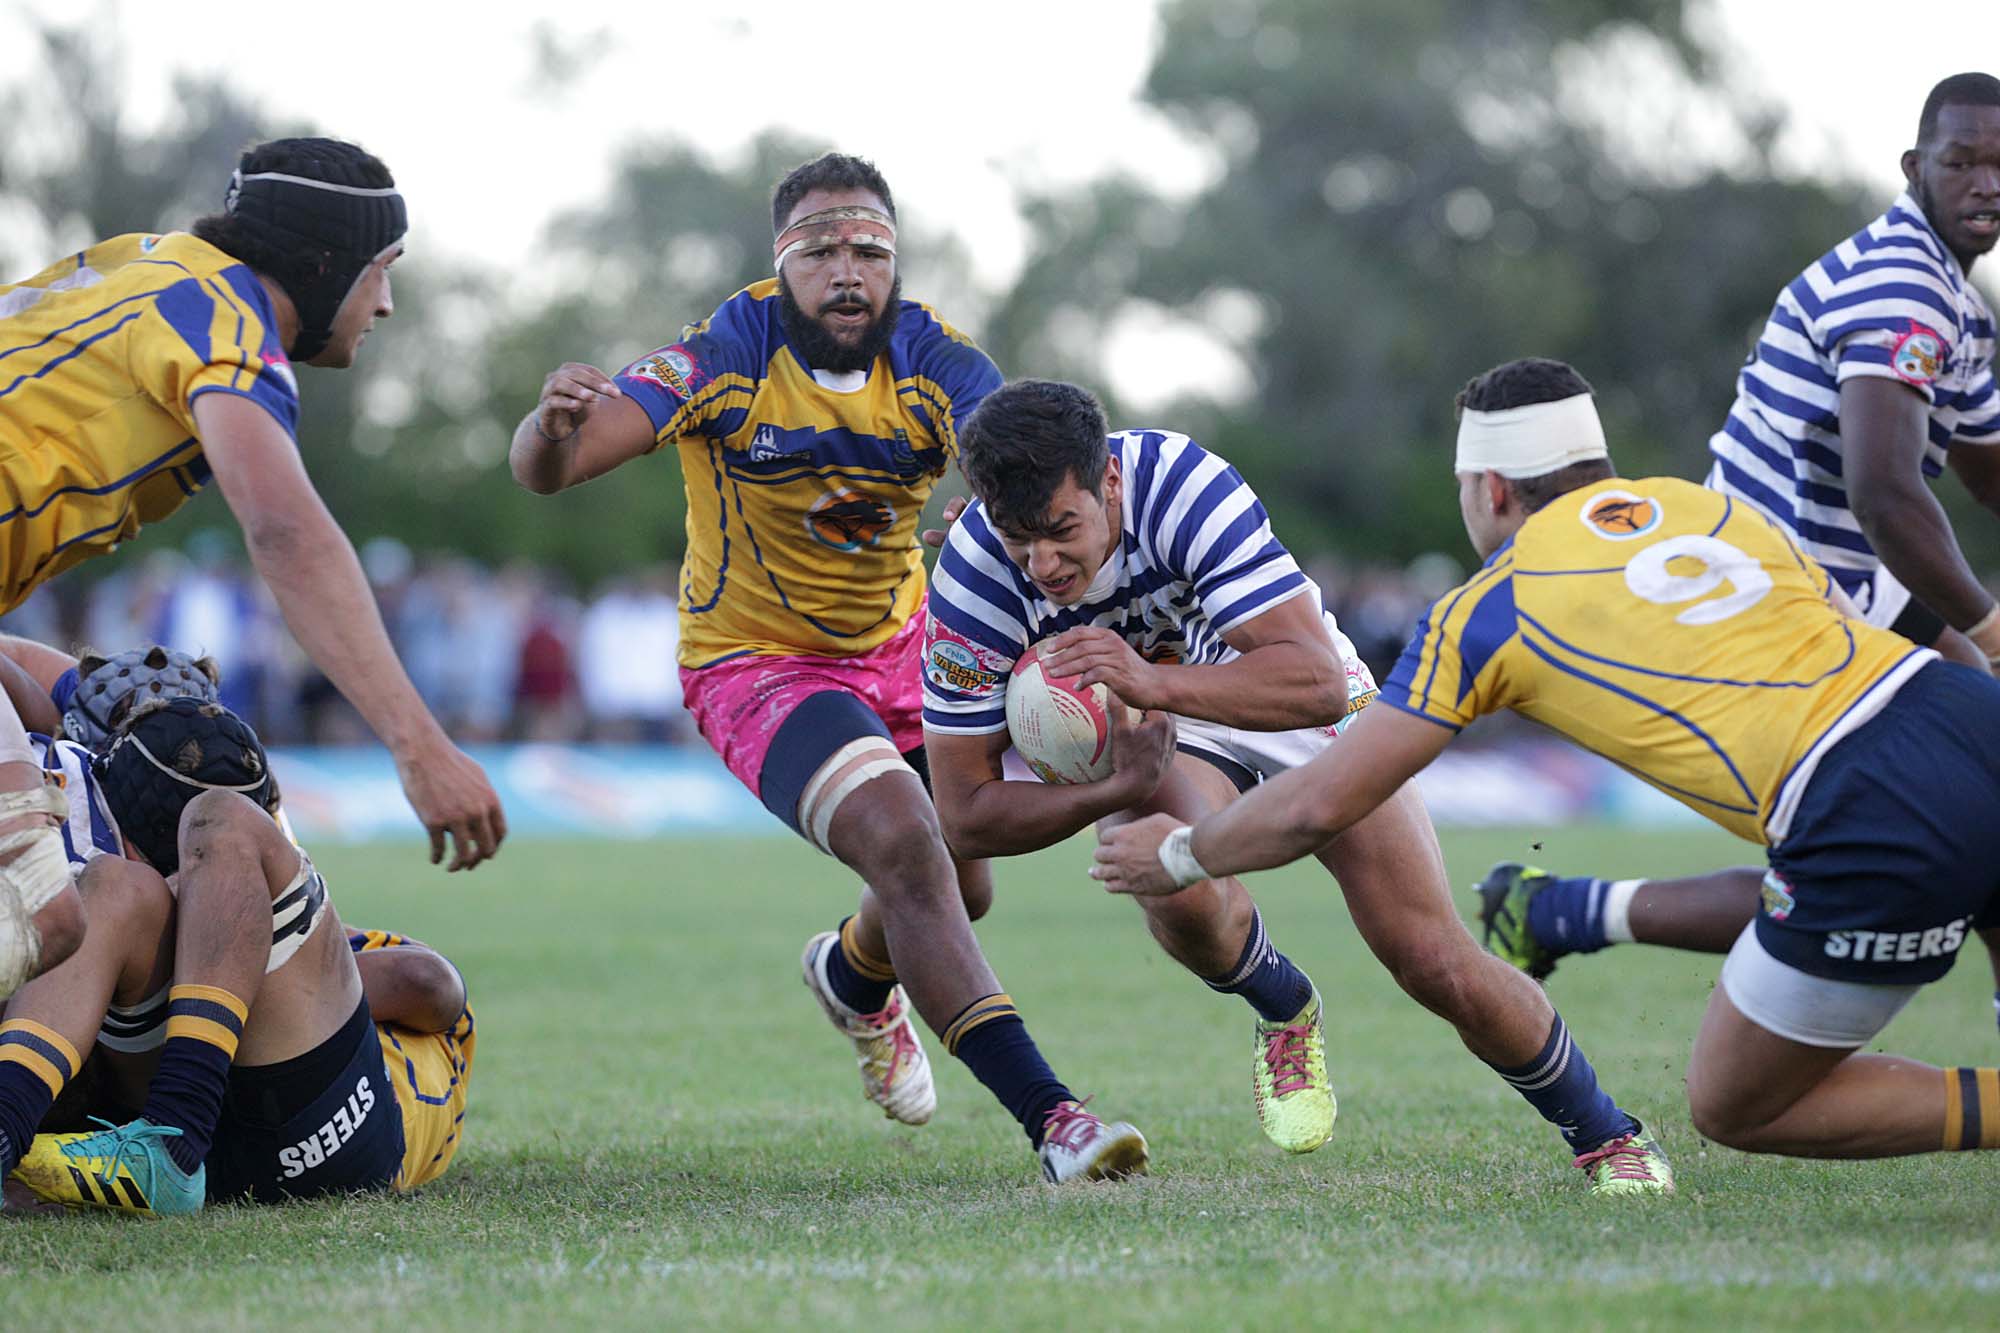 The Ikey Tigers kicked off the 2019 Varsity Cup season with a nail-biting 32–24 victory over Cape rivals University of the Western Cape on 4 February.